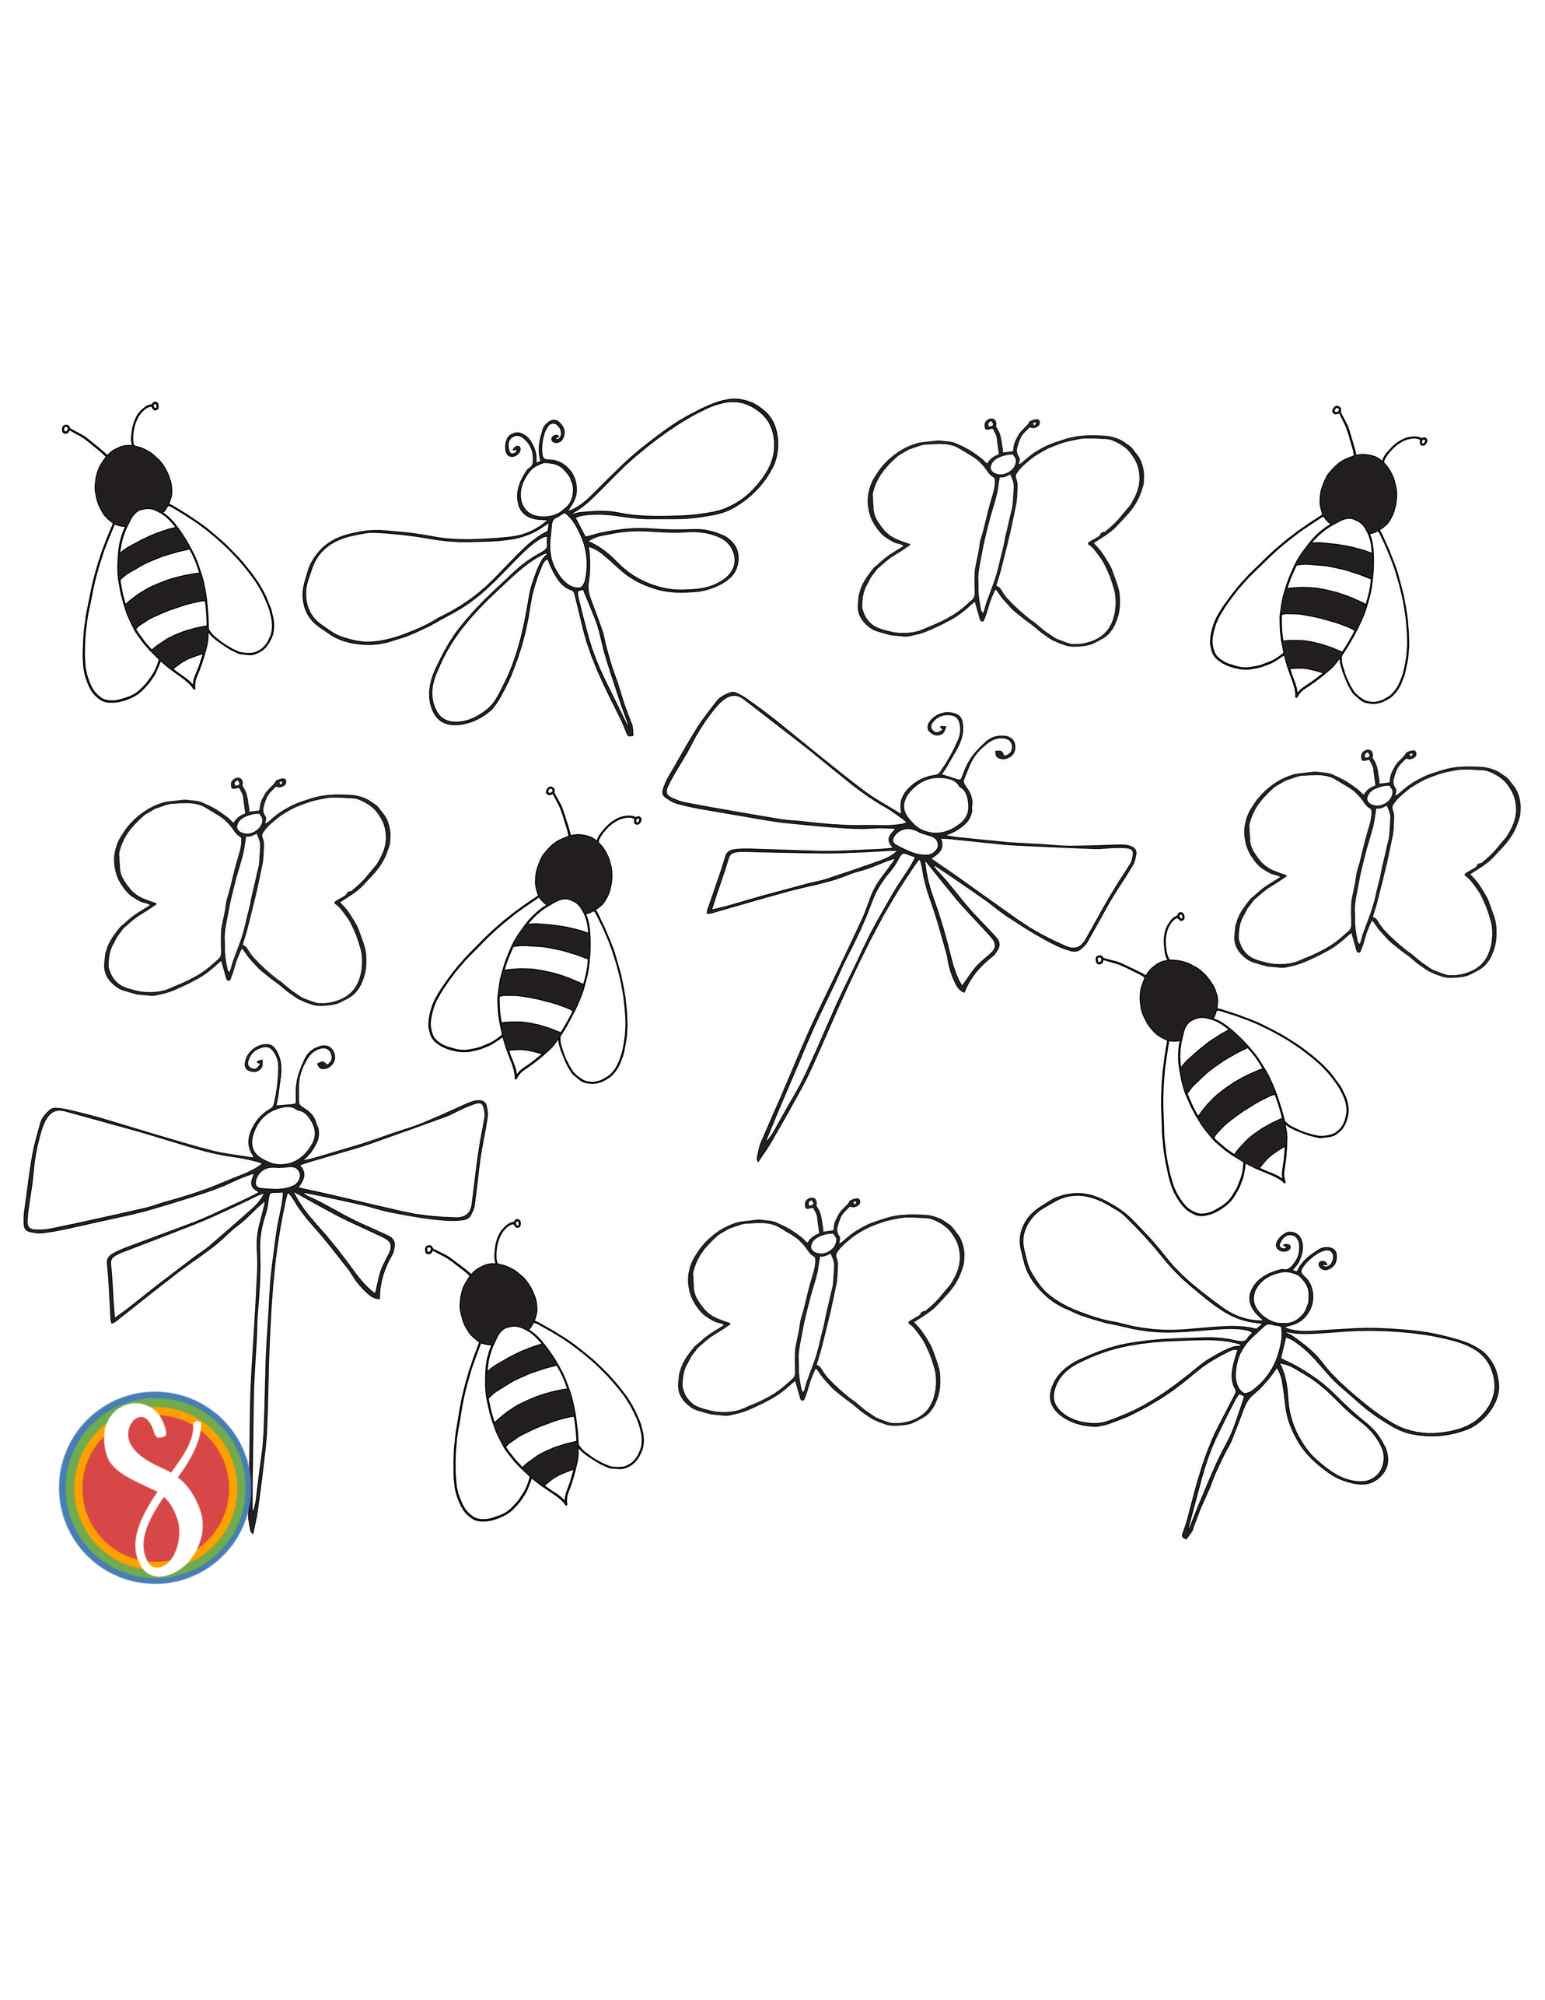 dragonflies coloring page with bees and butterflies